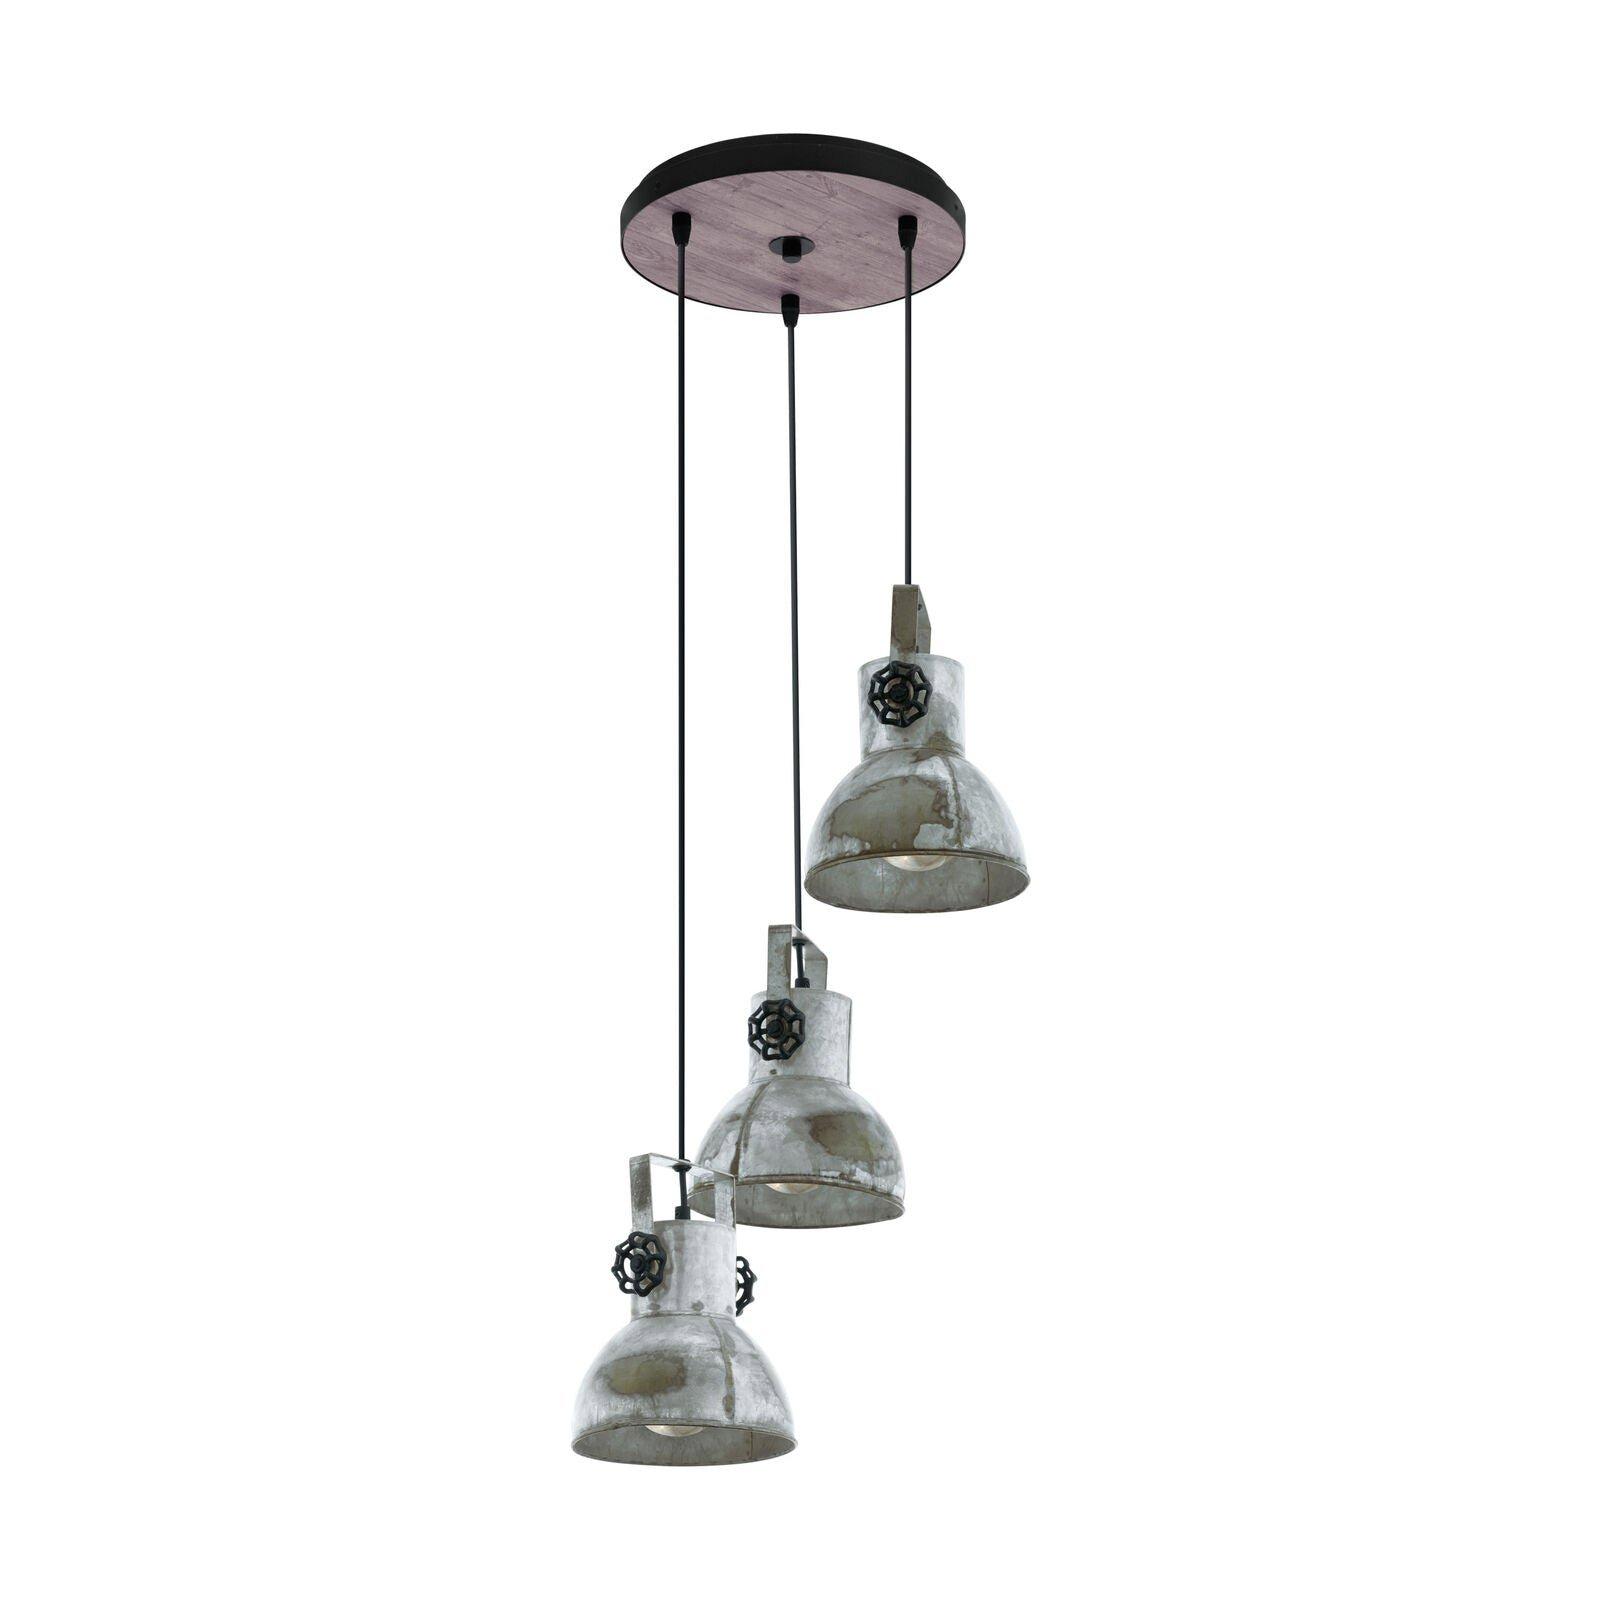 Hanging Ceiling Pendant Light Black & Raw Steel 3x 40W E27 Industrial Feature